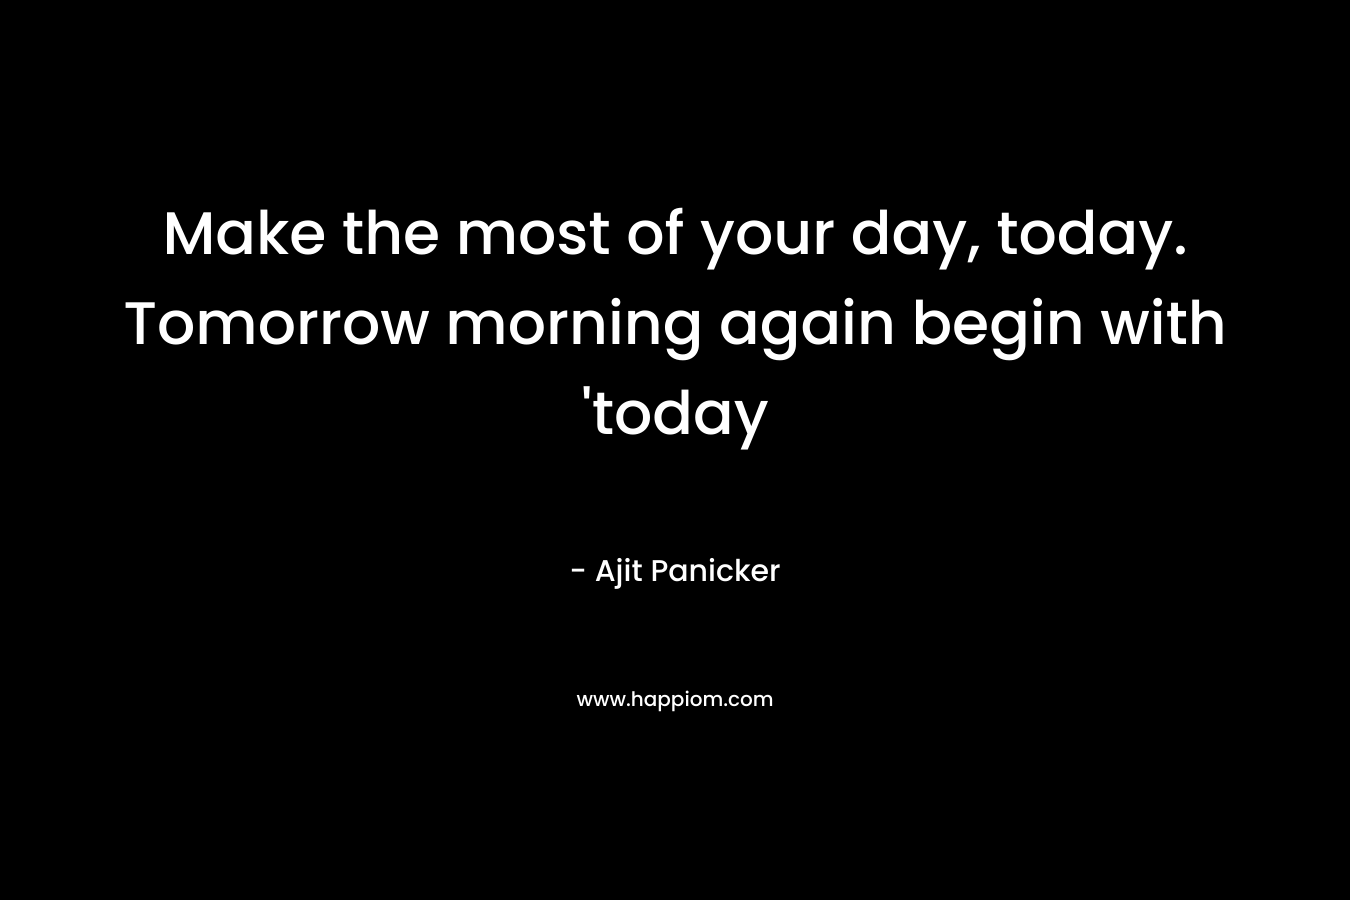 Make the most of your day, today. Tomorrow morning again begin with ‘today – Ajit Panicker